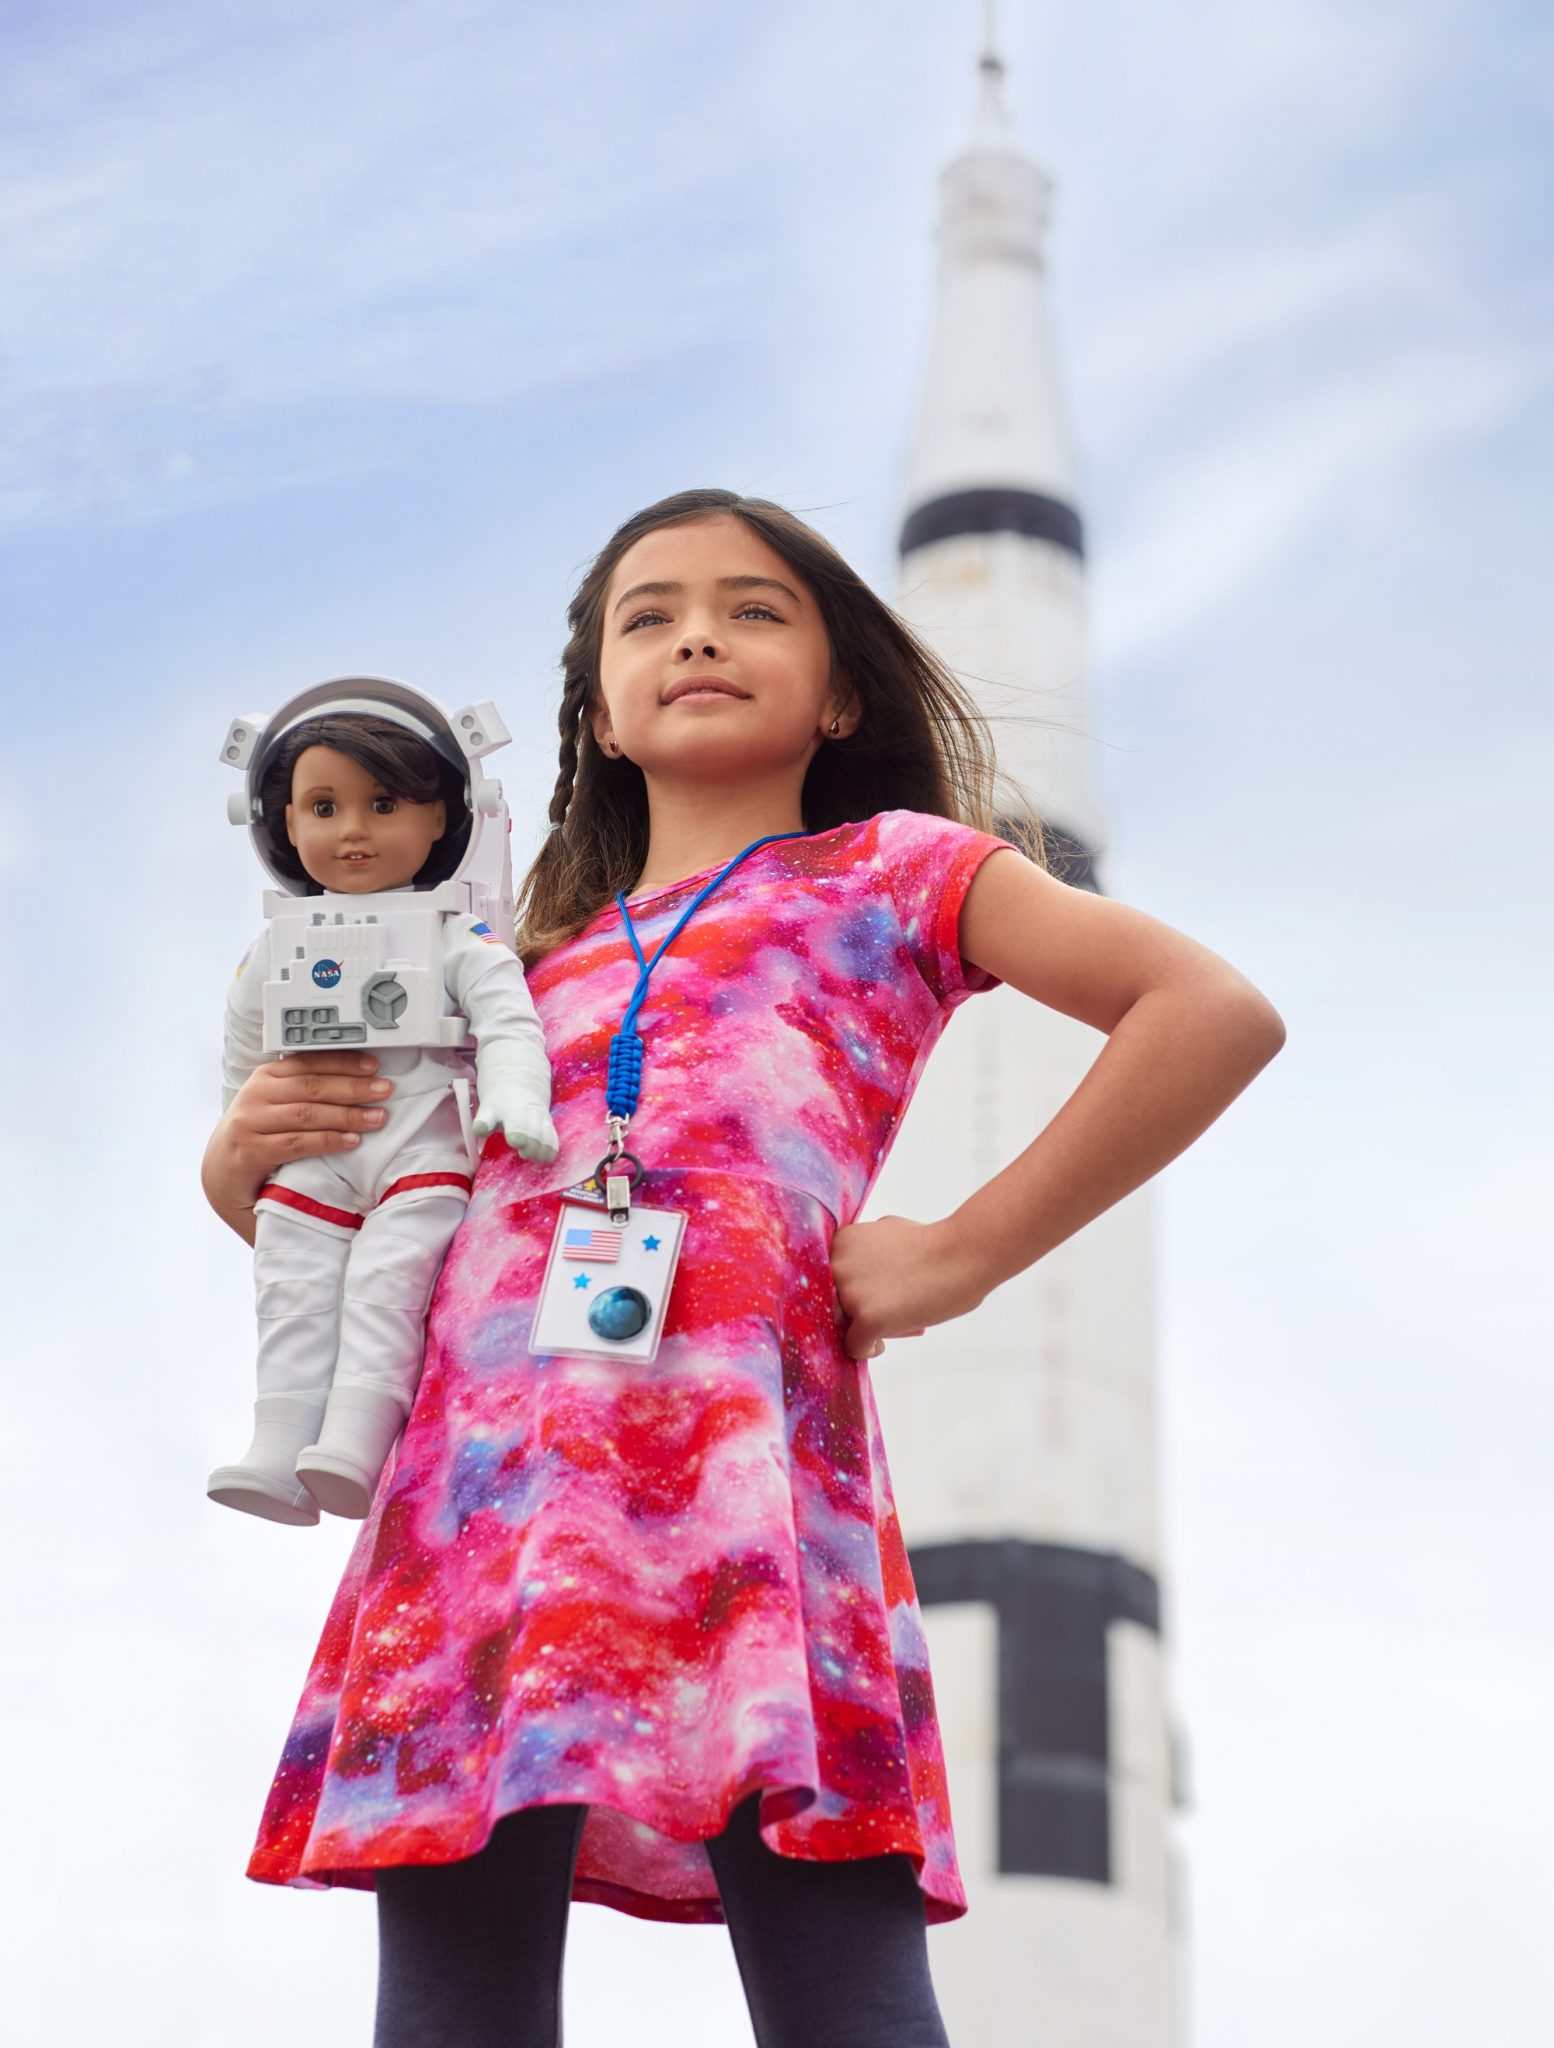 american girl luciana space suit